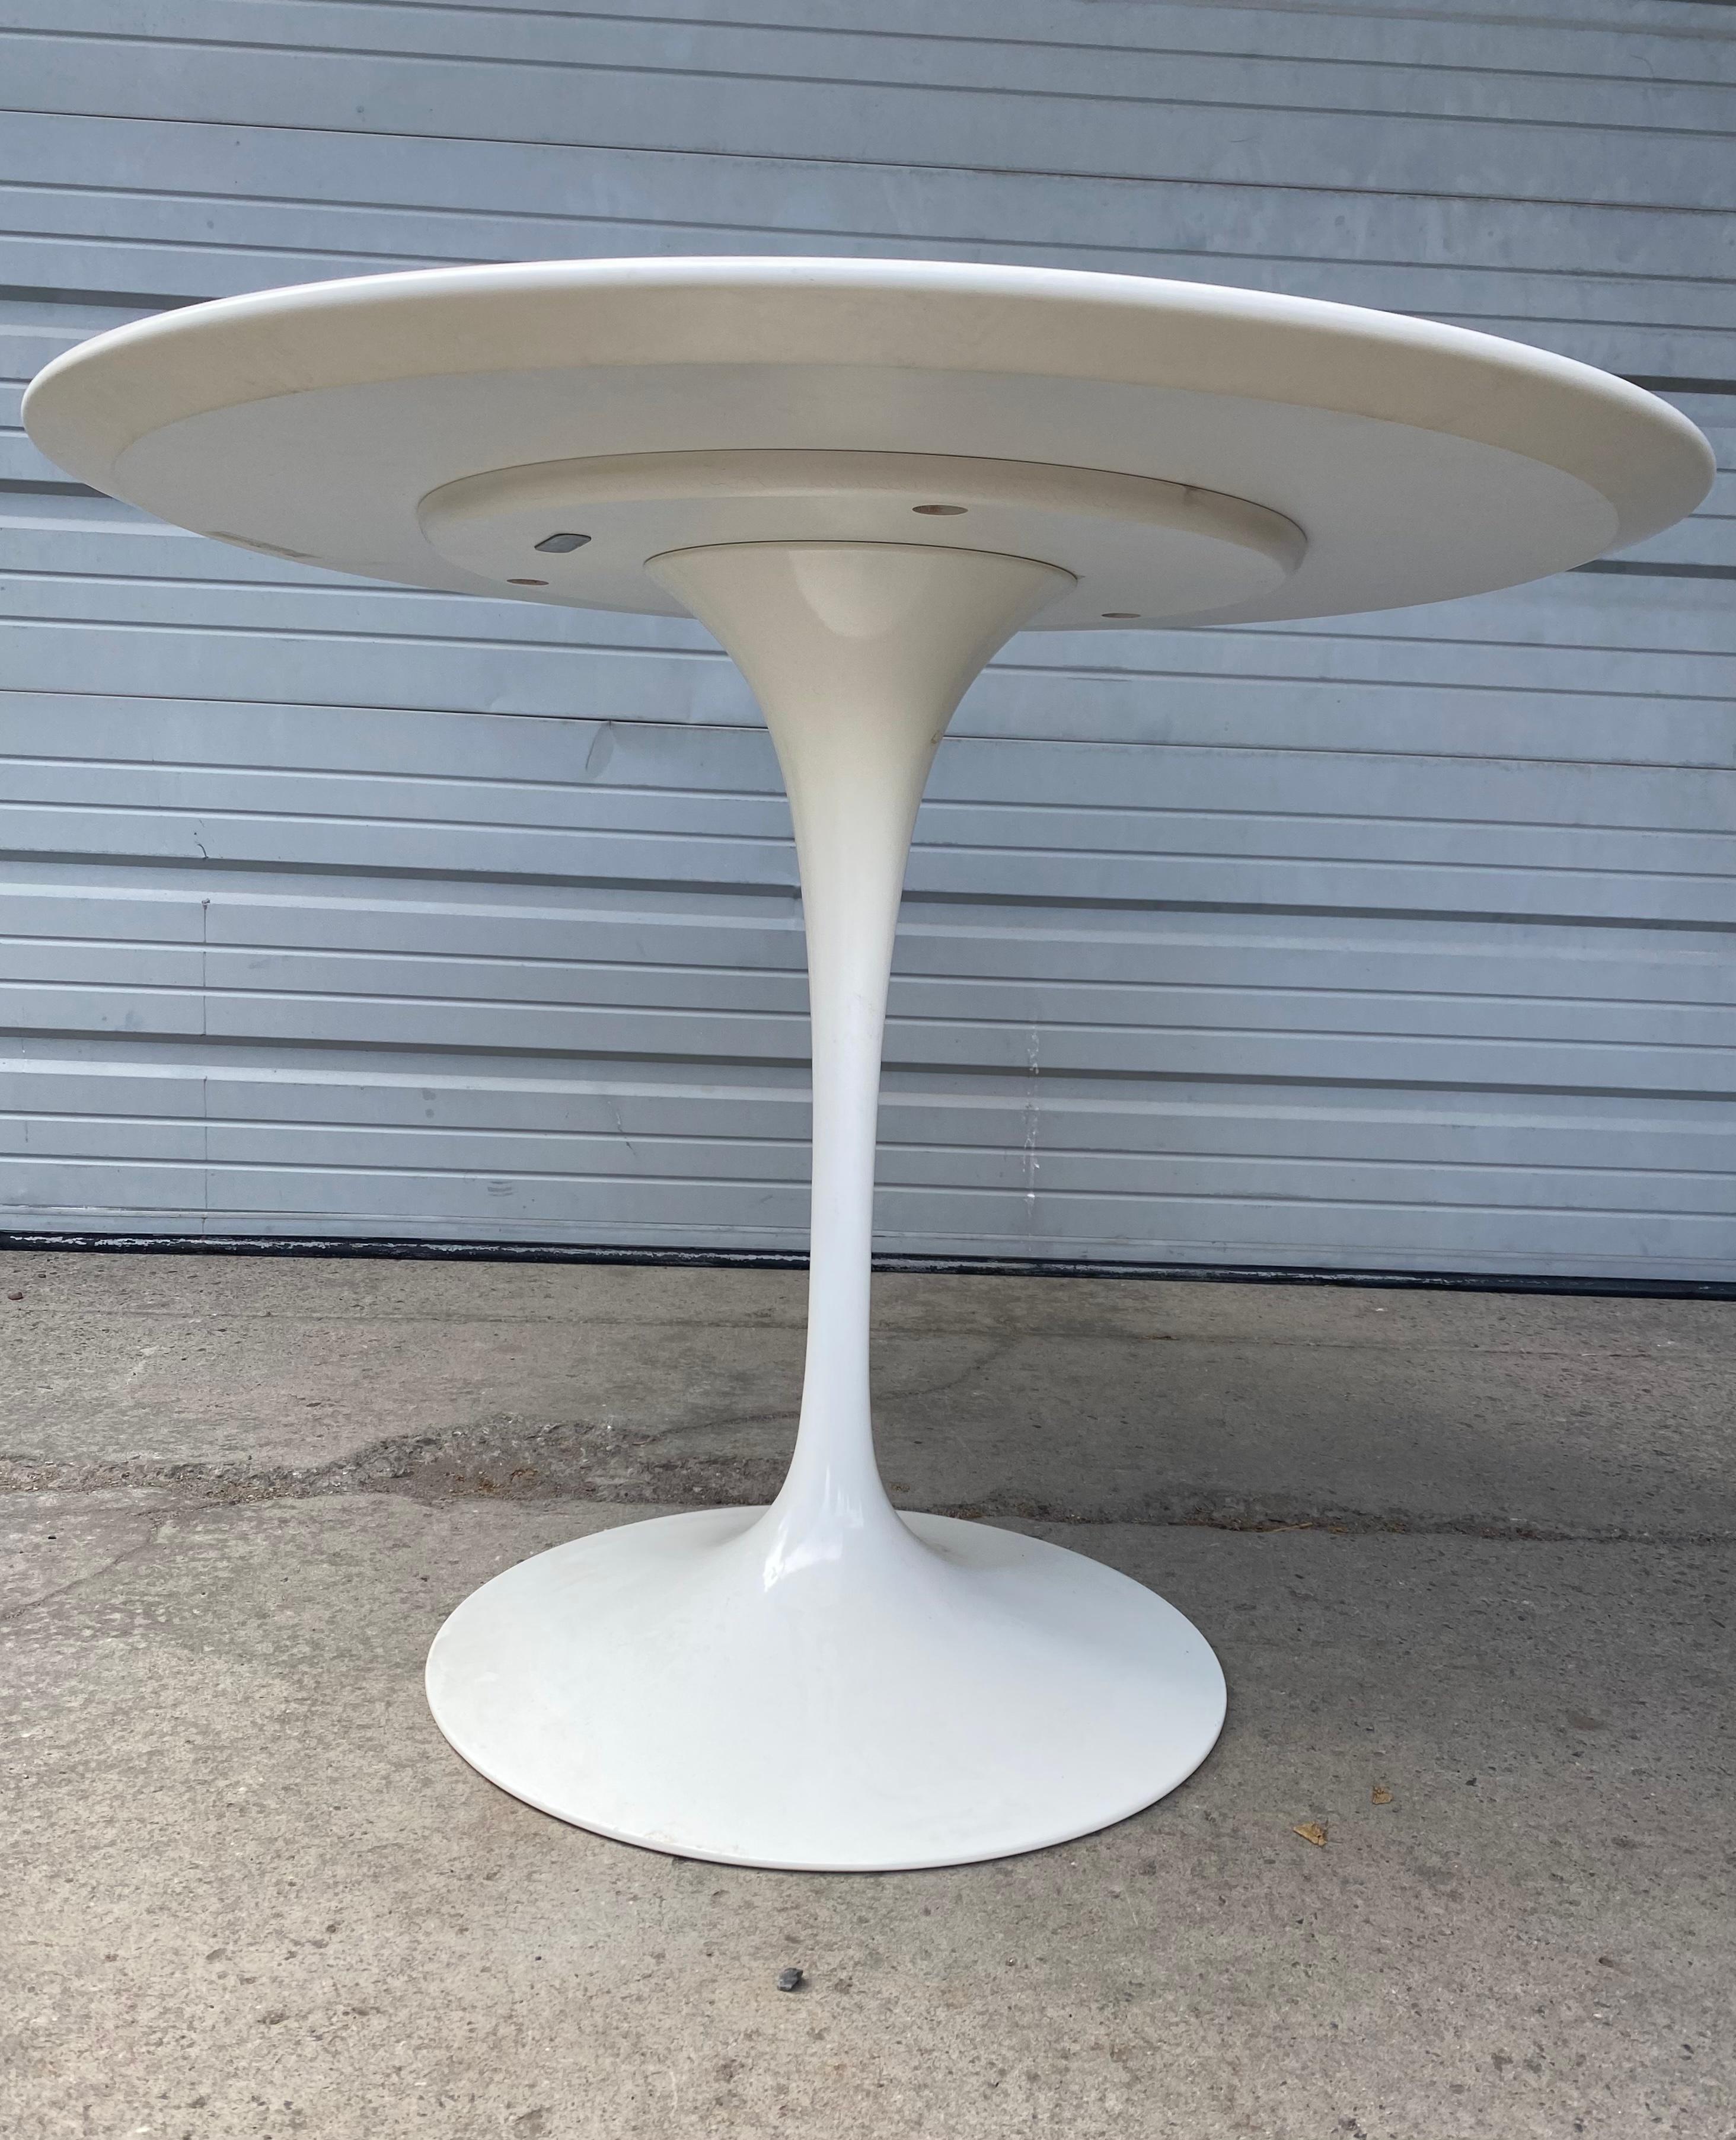 Classic Modernist dining table designed by Eero Saarinen manufactured by Knoll, newer production, made in Italy, Retains original labels, in Excellent original condition. Measure: 36